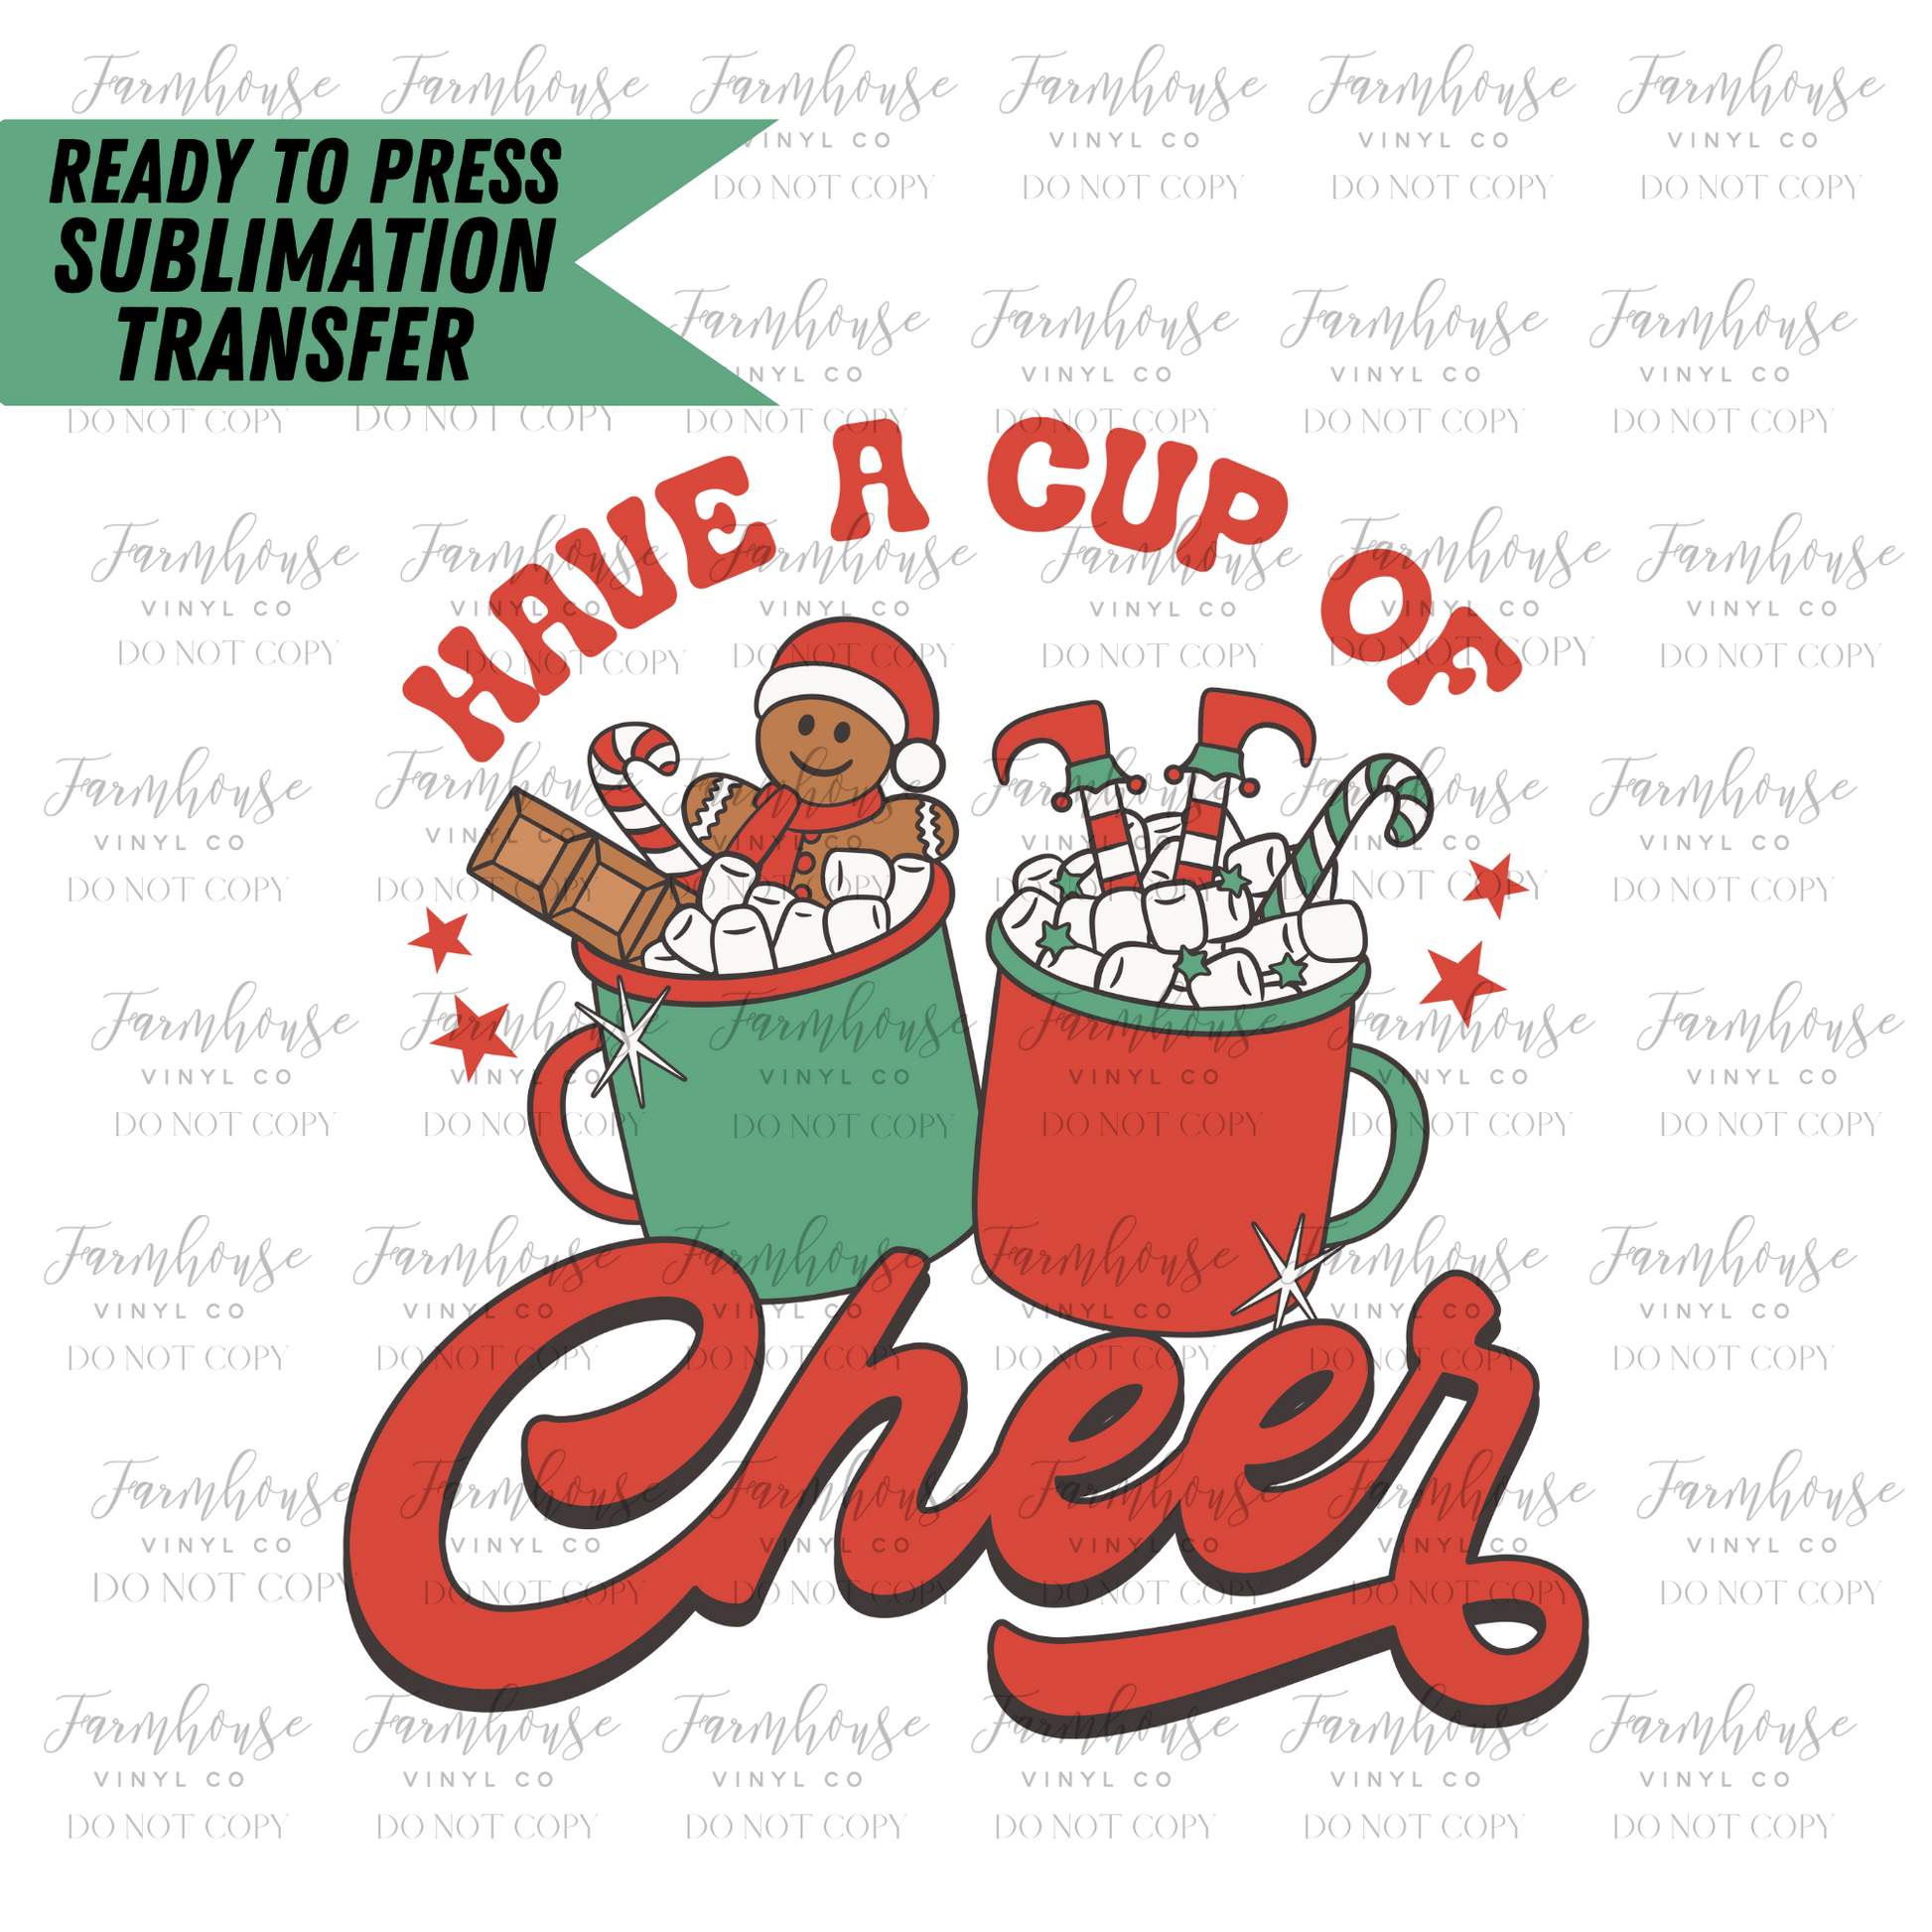 Have A Cup of Cheer Ready to Press Sublimation Transfer - Farmhouse Vinyl Co